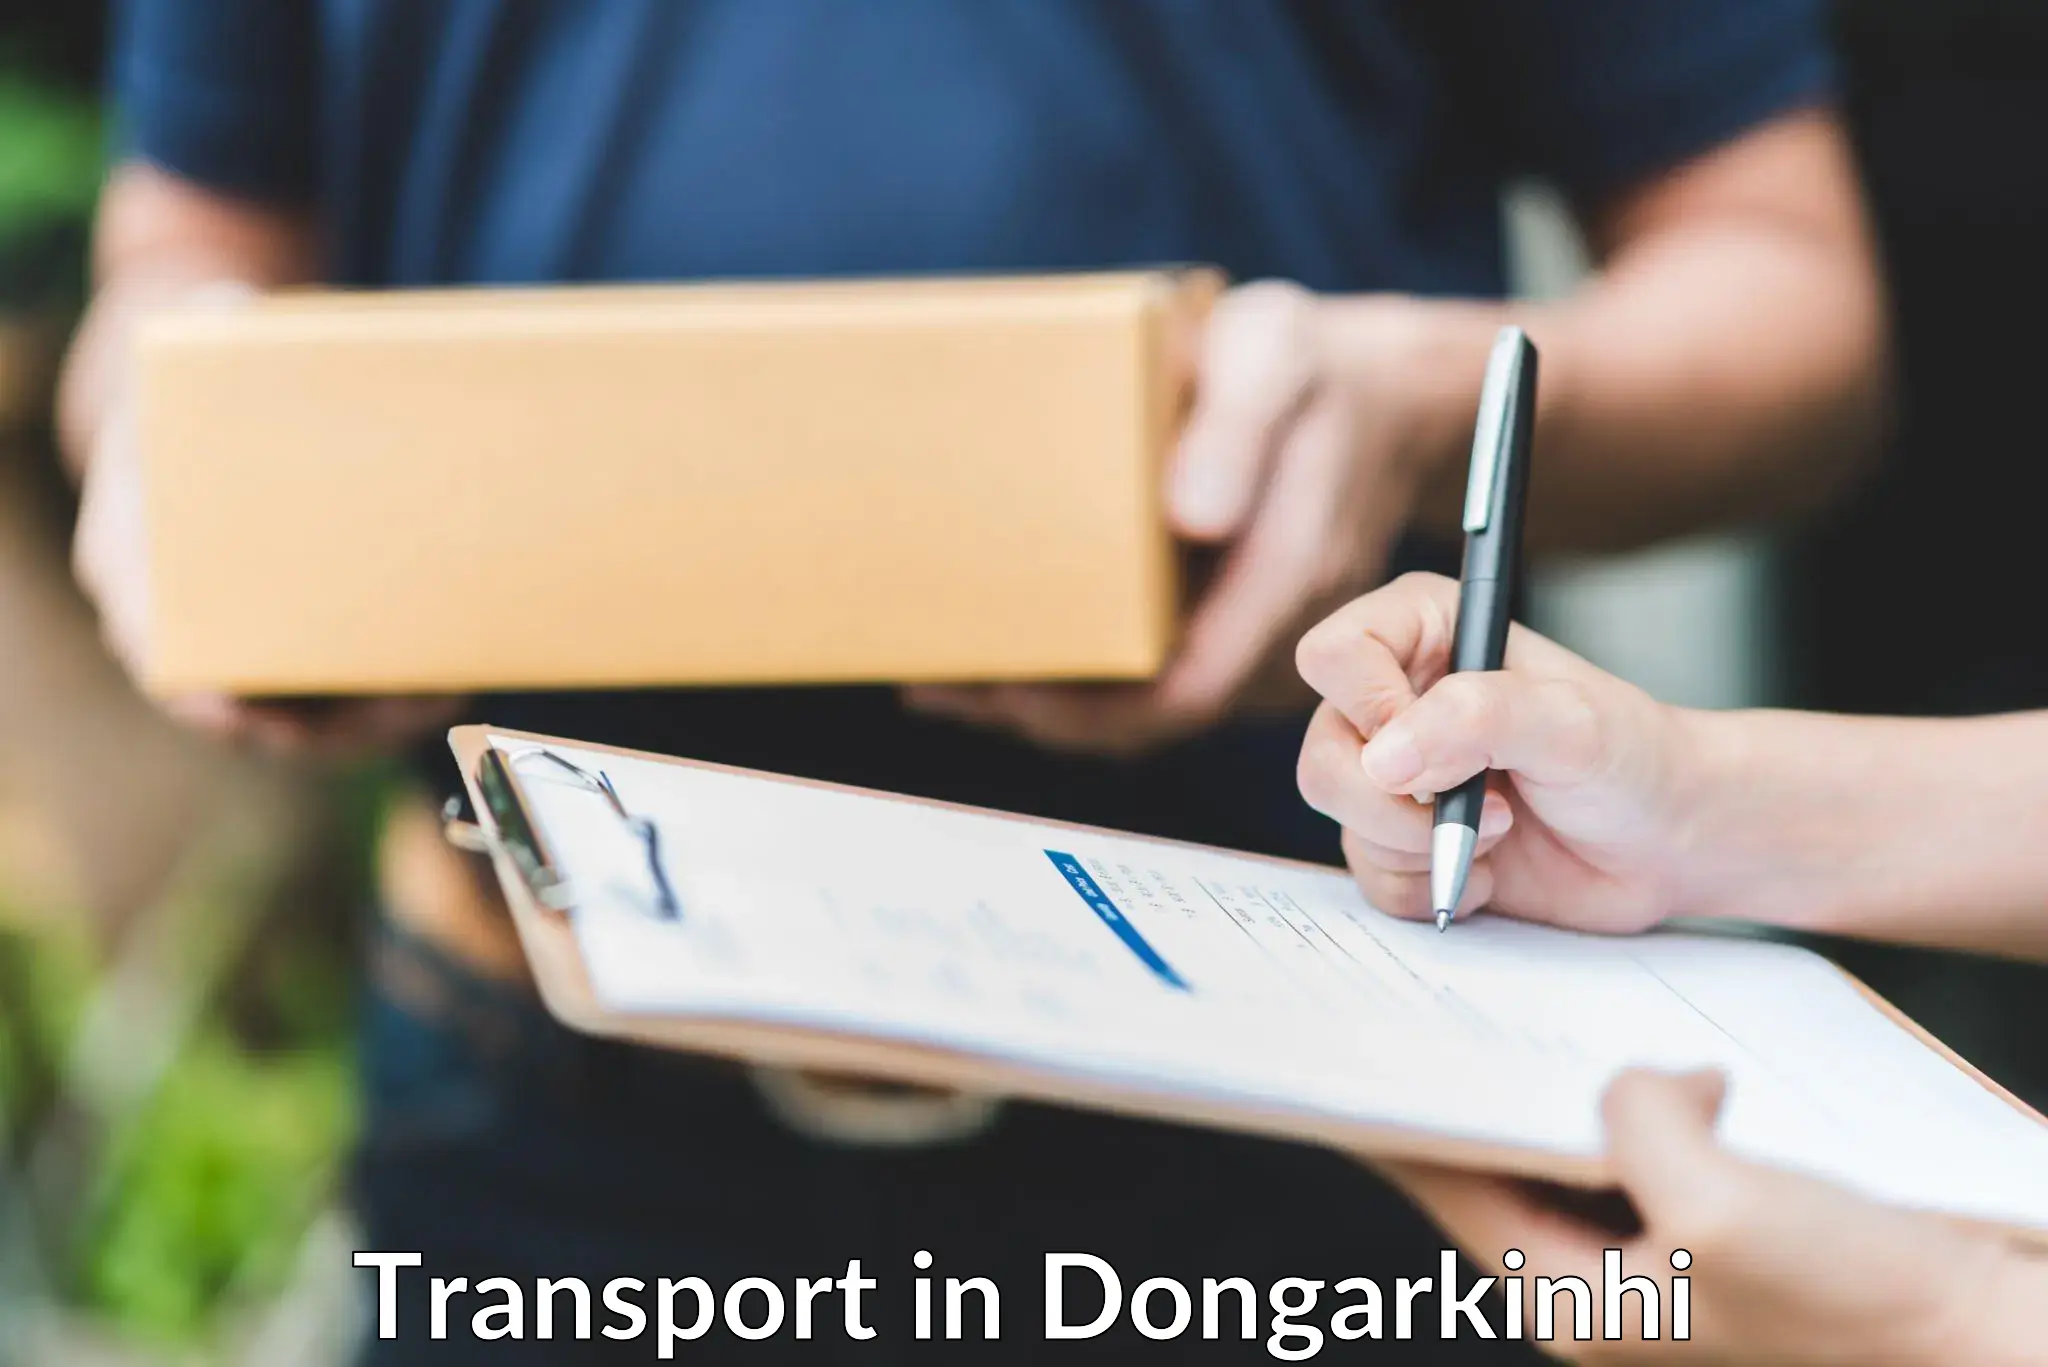 Transport shared services in Dongarkinhi